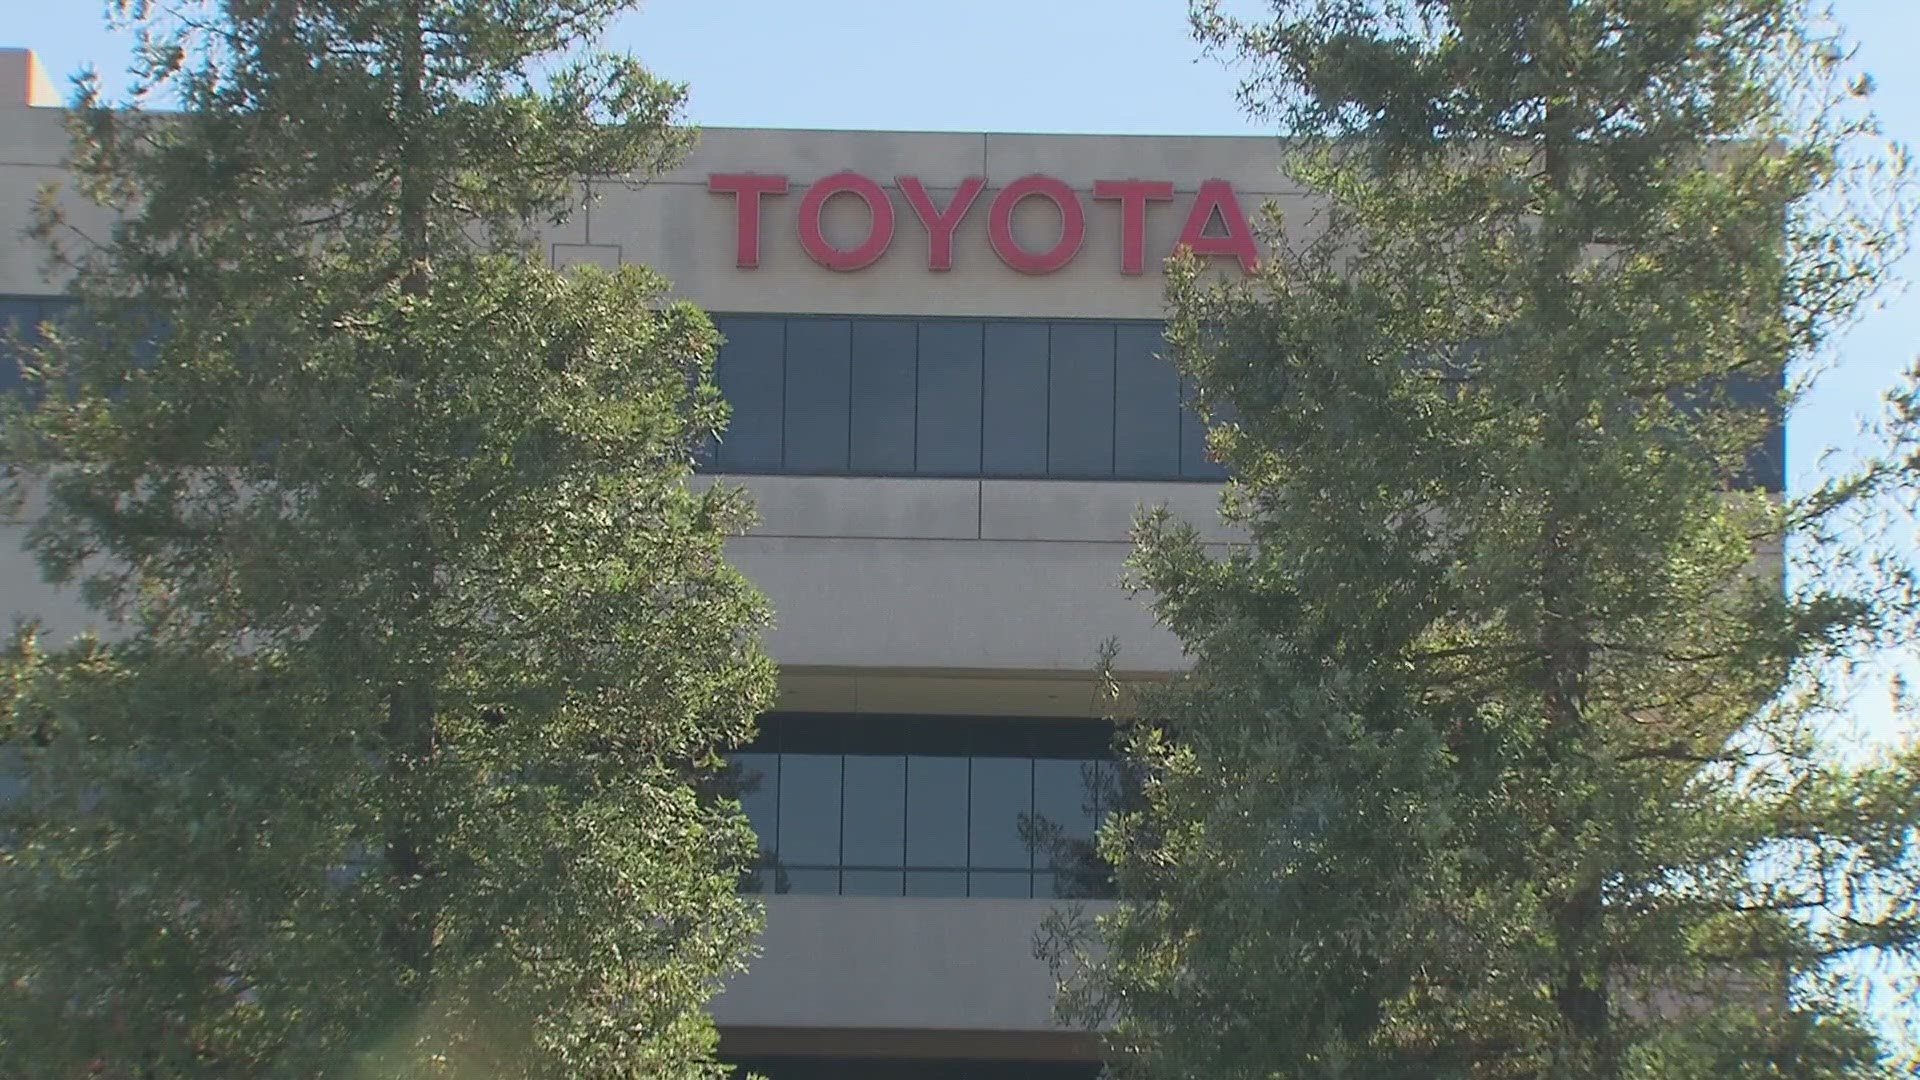 The recall covers a range of Toyota and Lexus vehicles with model years from 2020 to 2022.